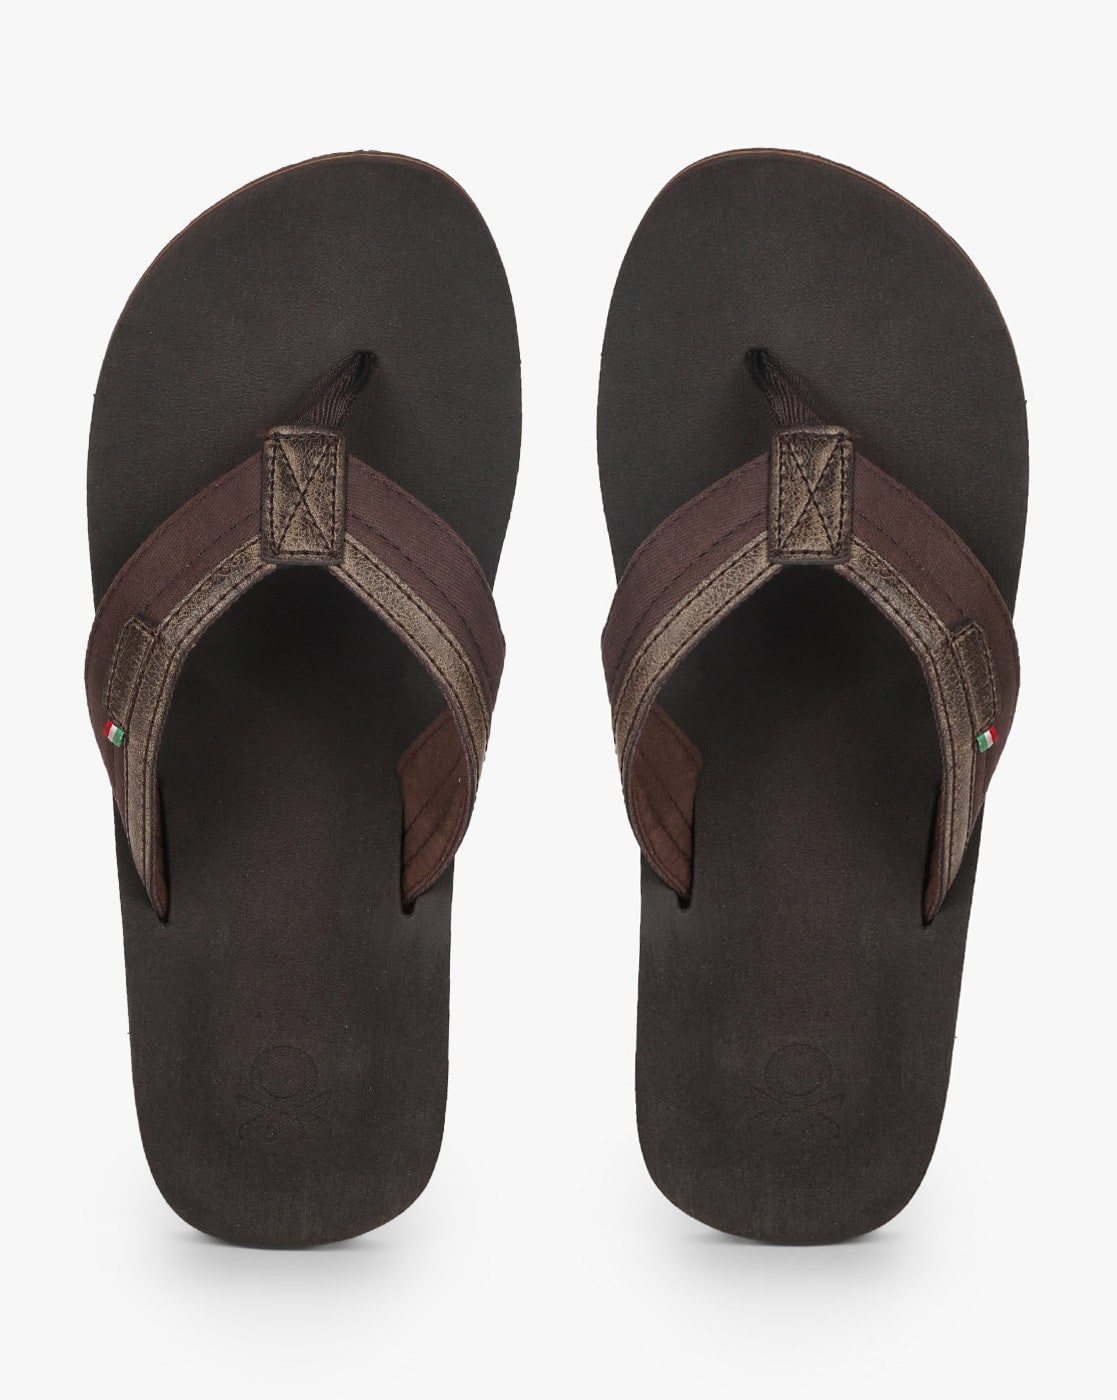 ucb leather slippers